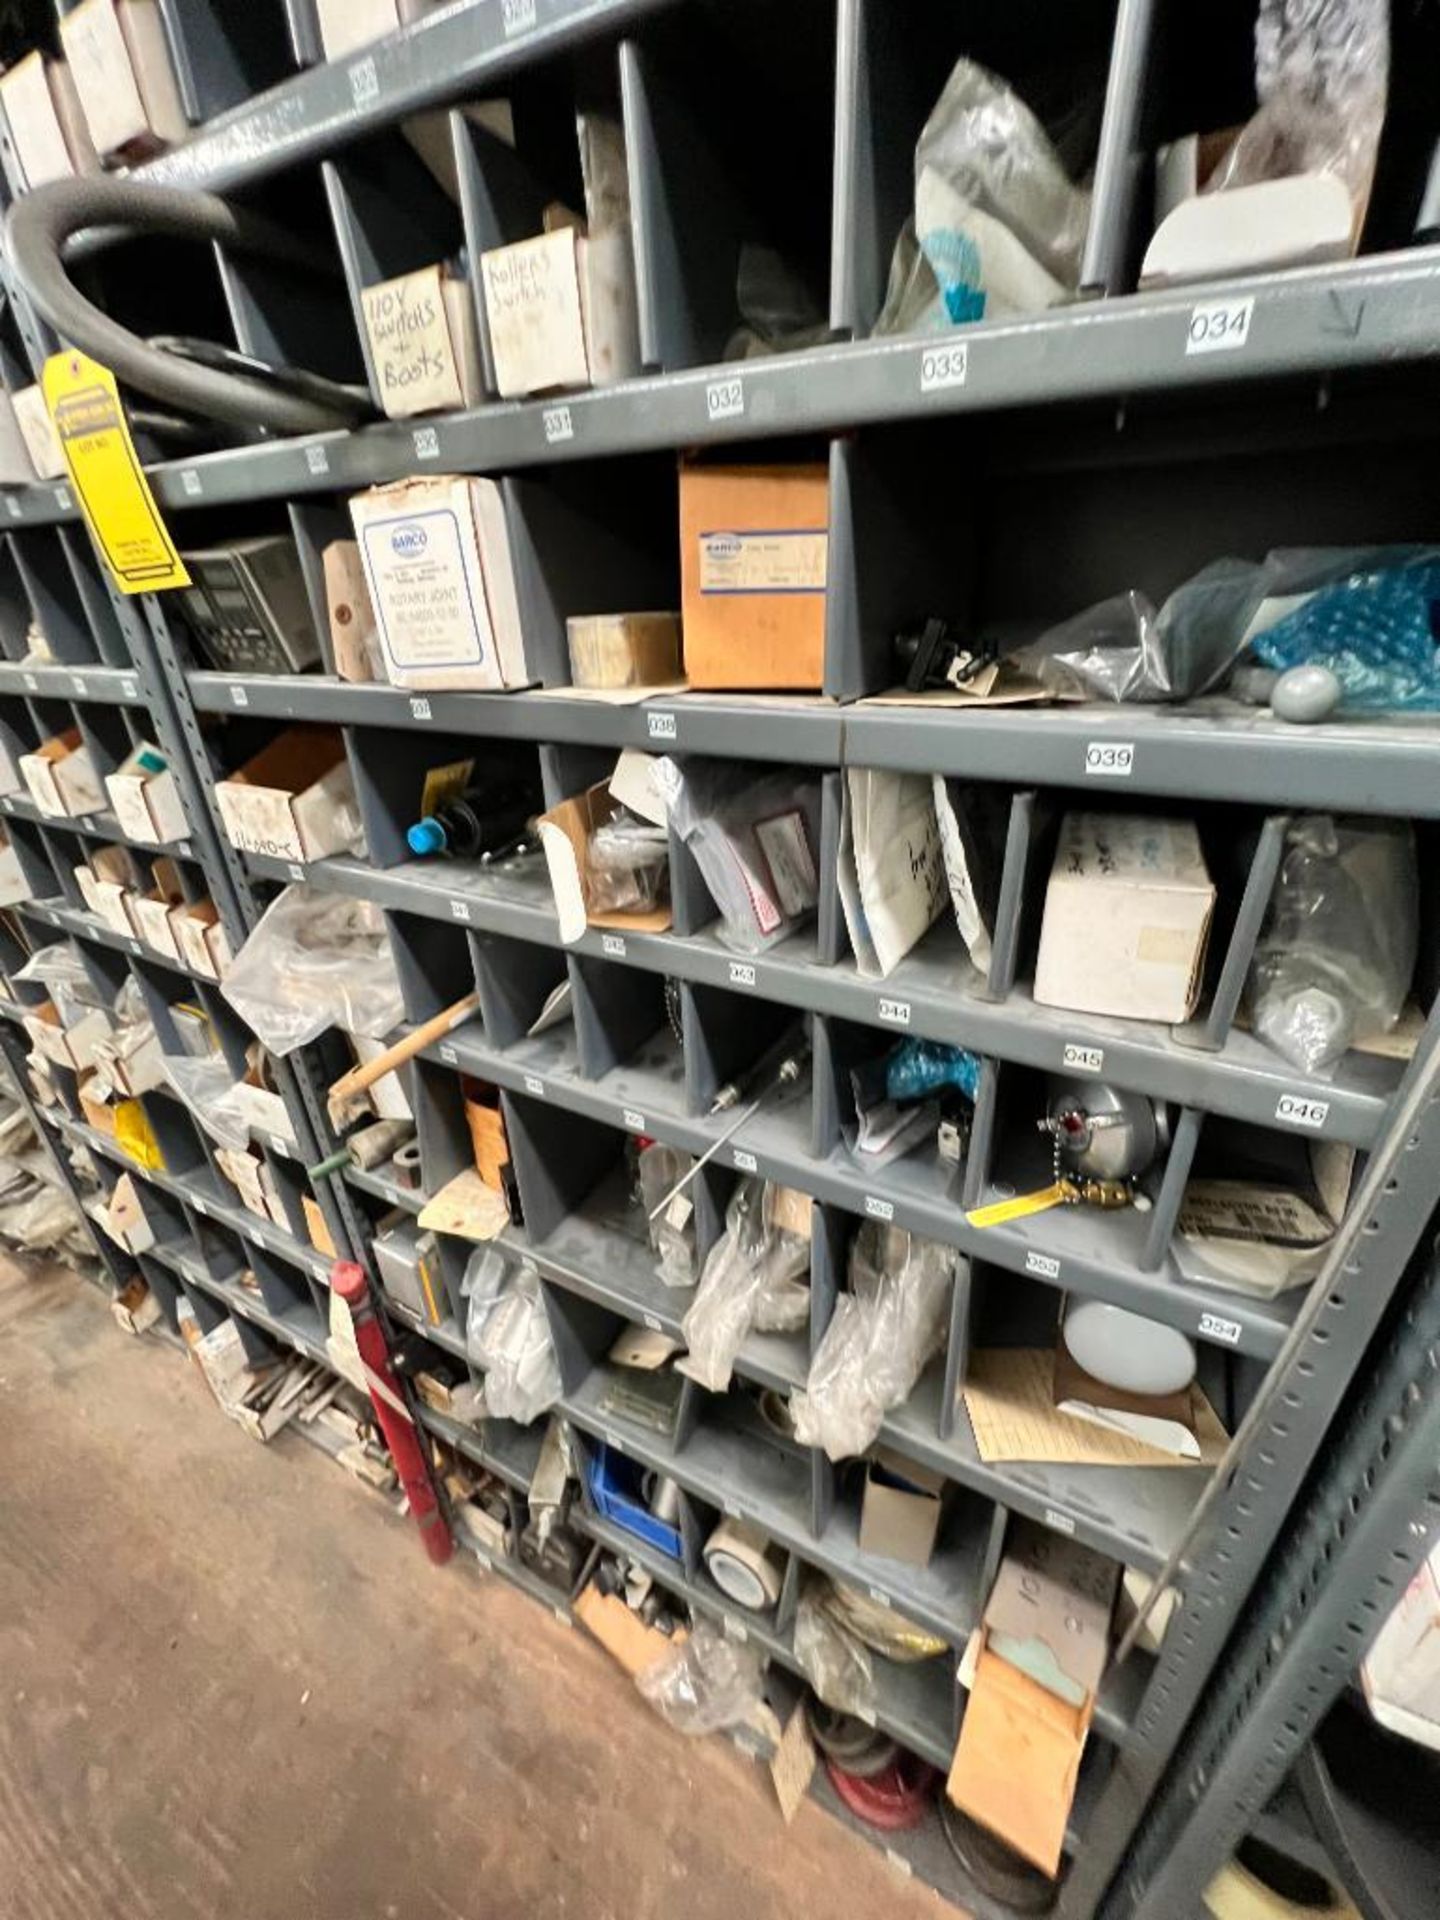 (28) Shelves of Assorted Parts, VERY LARGE LOT Consisting of MRO, Drives, Valves, PLC, Nuts, Bolts, - Image 28 of 67